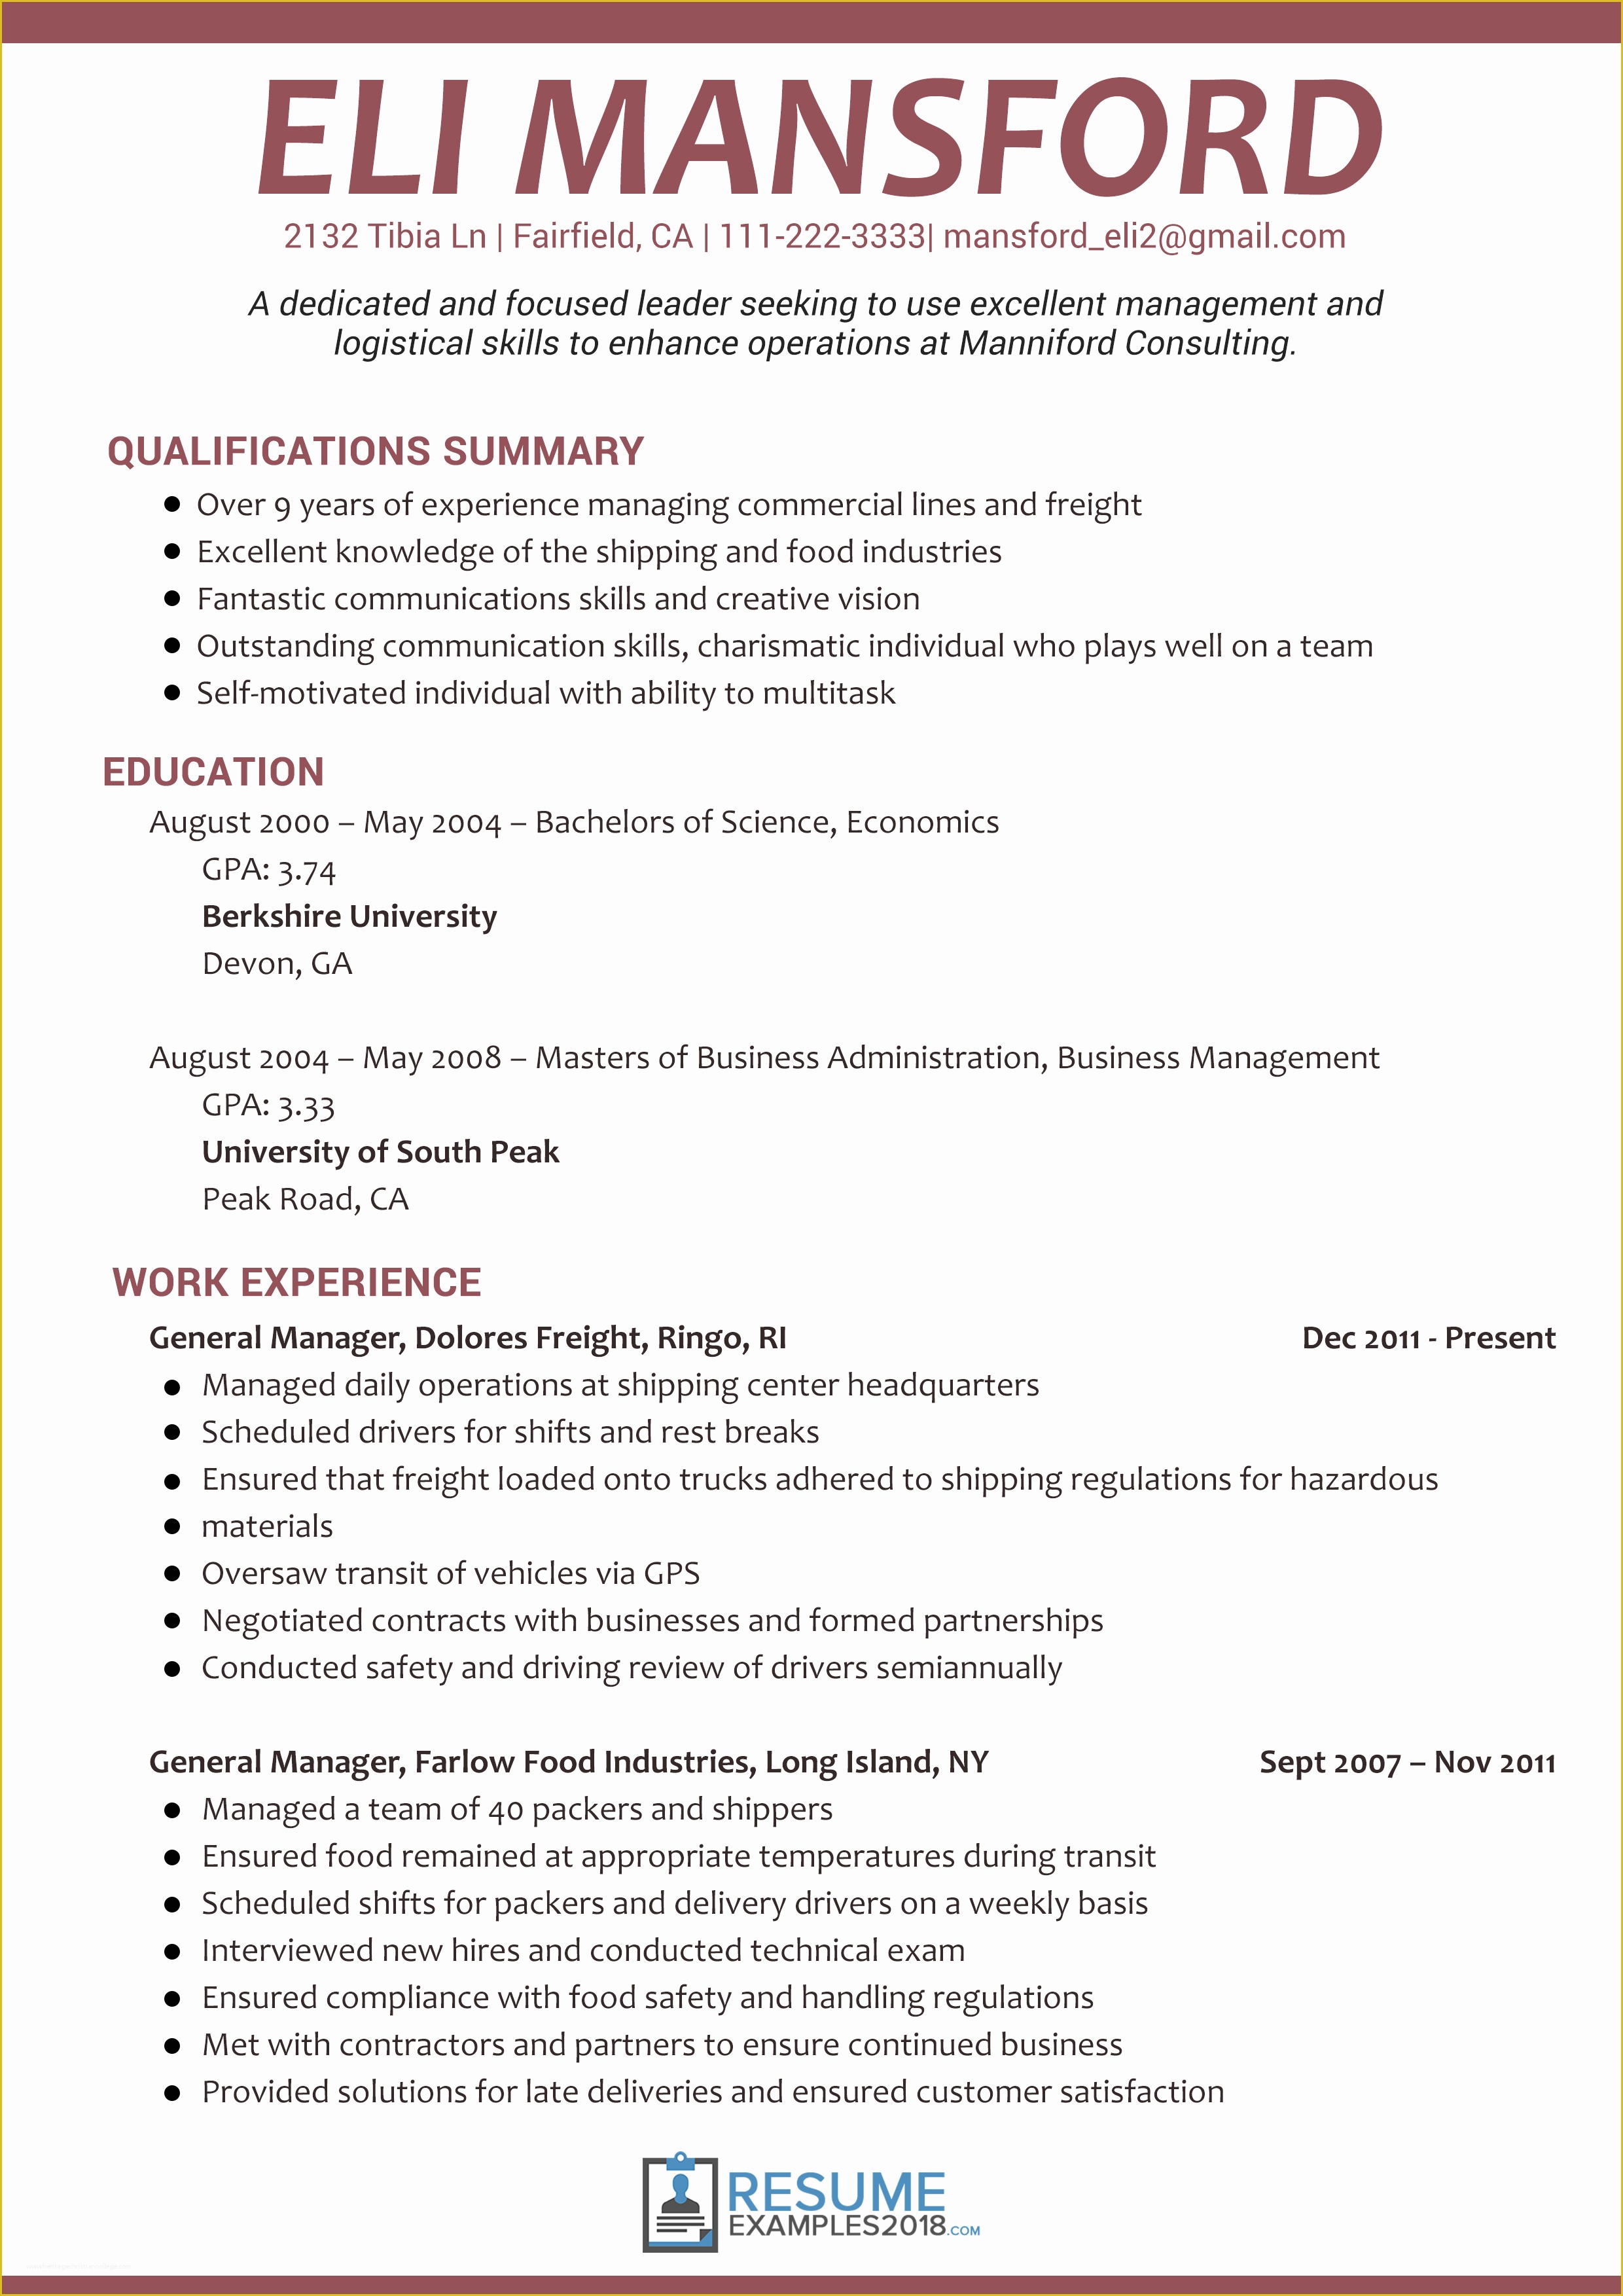 Resume Templates 2018 Free Of Get Better Results with Management Resume Examples 2019